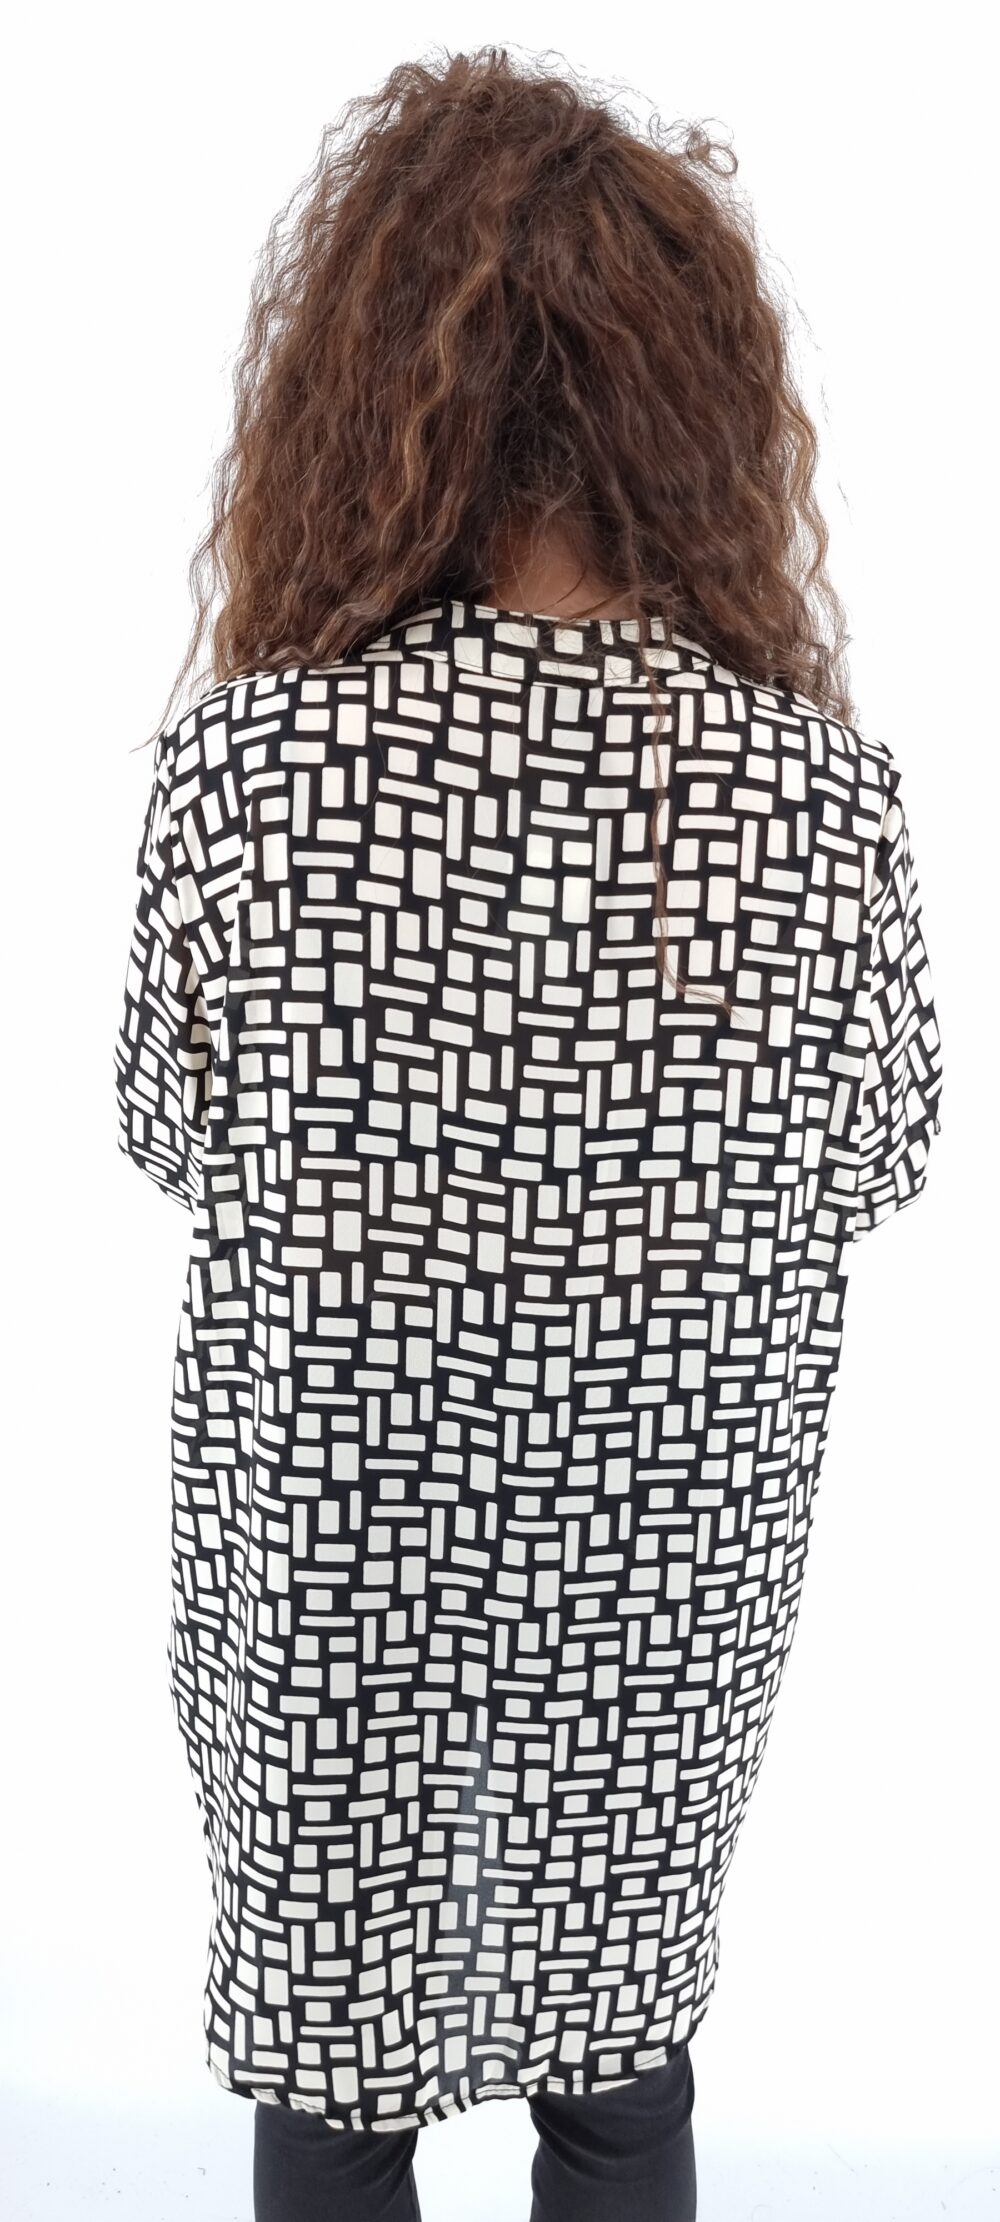 Shirts with a pattern of geometric shapes in black and white